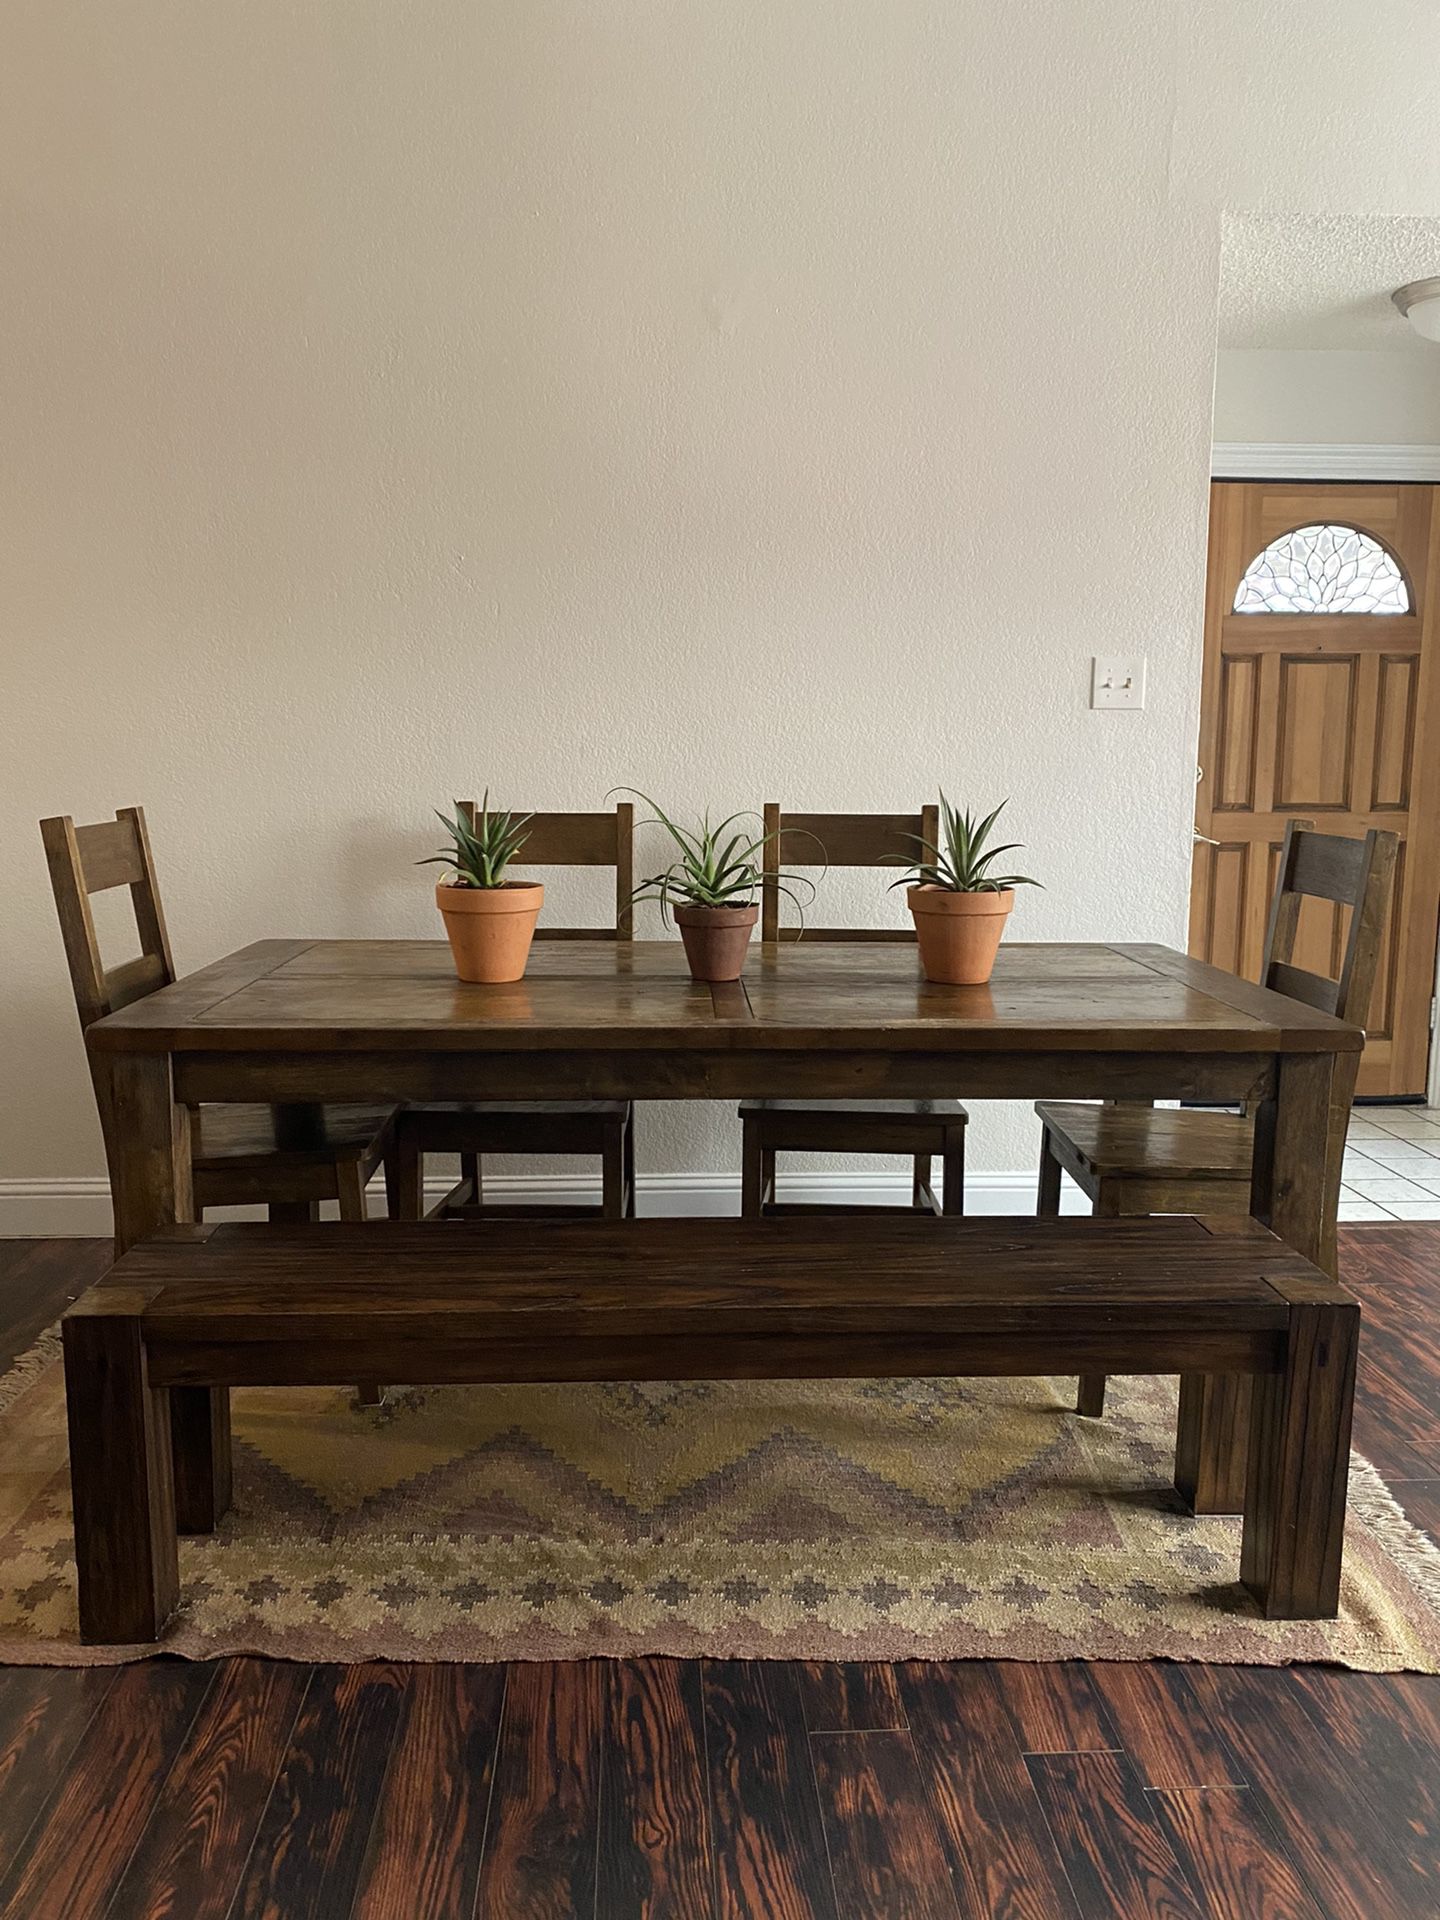 Rustic Dining Table 4 Chair And Table